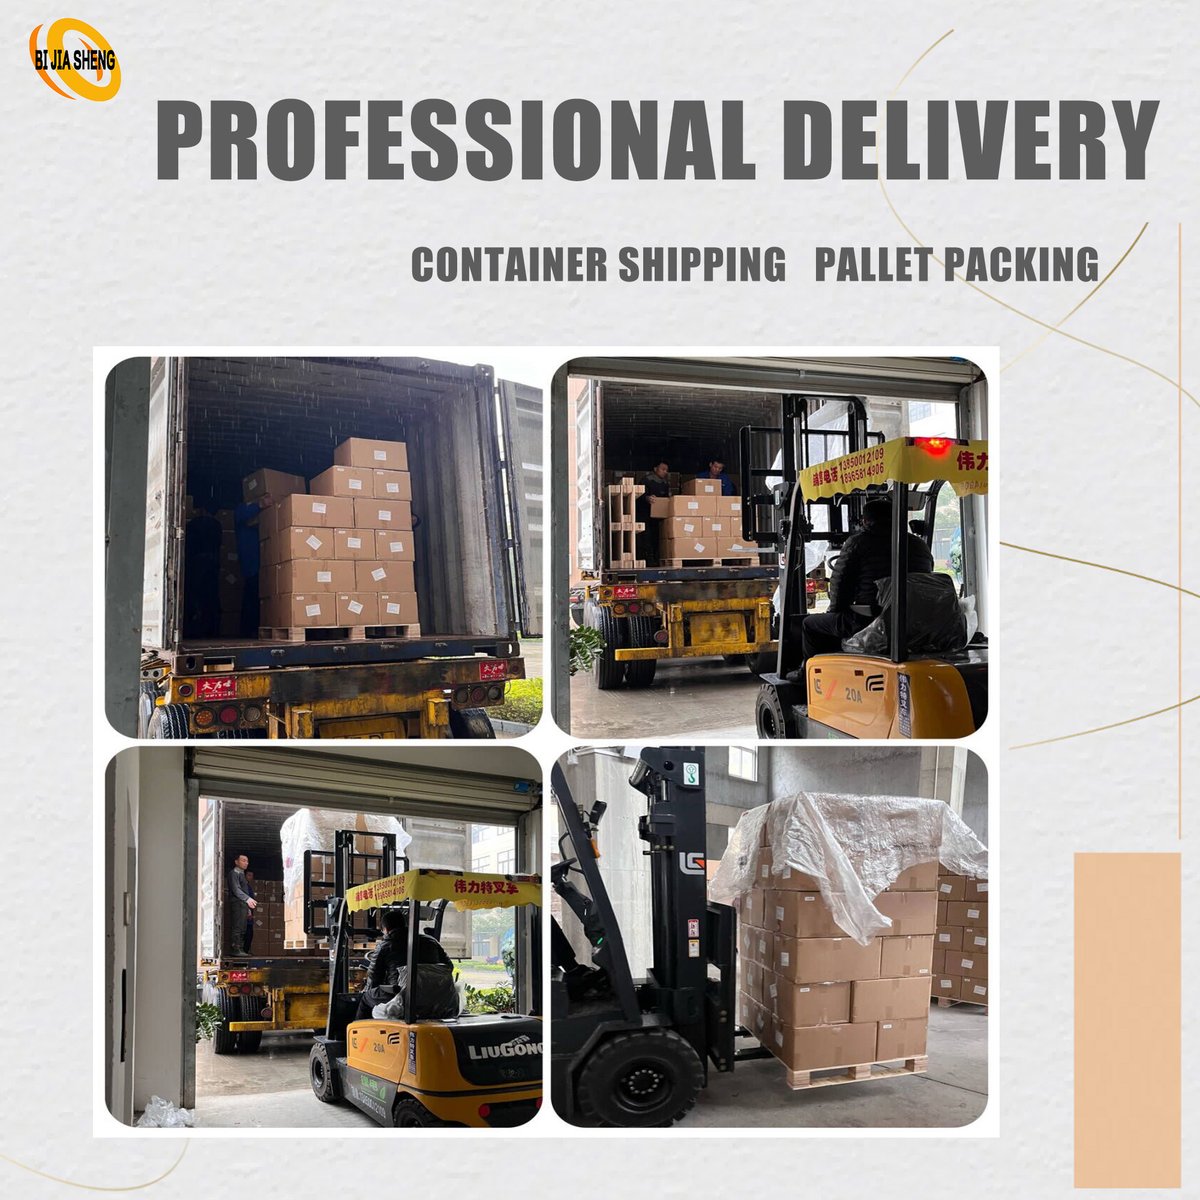 BIJIASHENG provide the fastest and most reliable shipping services for your products. We are passionate about our customers, speed and reliability to get products to you faster.

#Packaging #PackagingSolutions #CustomizableOptions #GlassBottle #manufacturer #Customizable